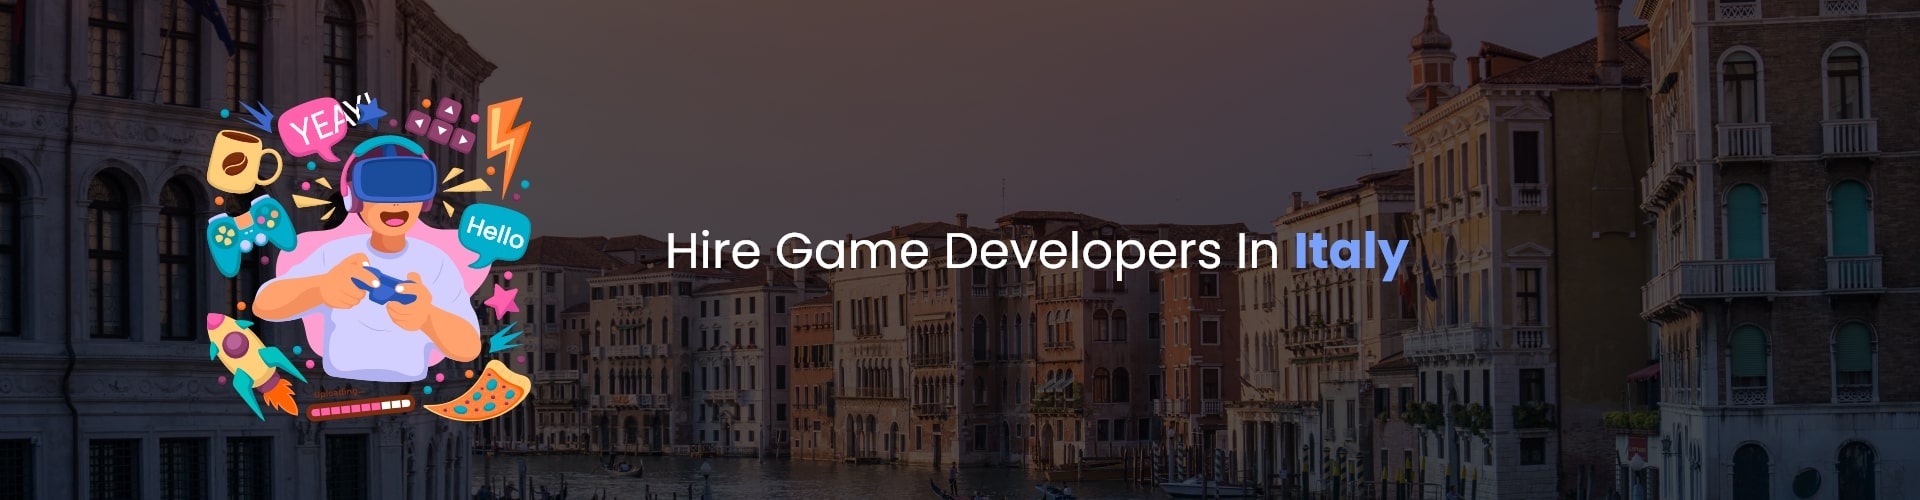 hire game developers in italy